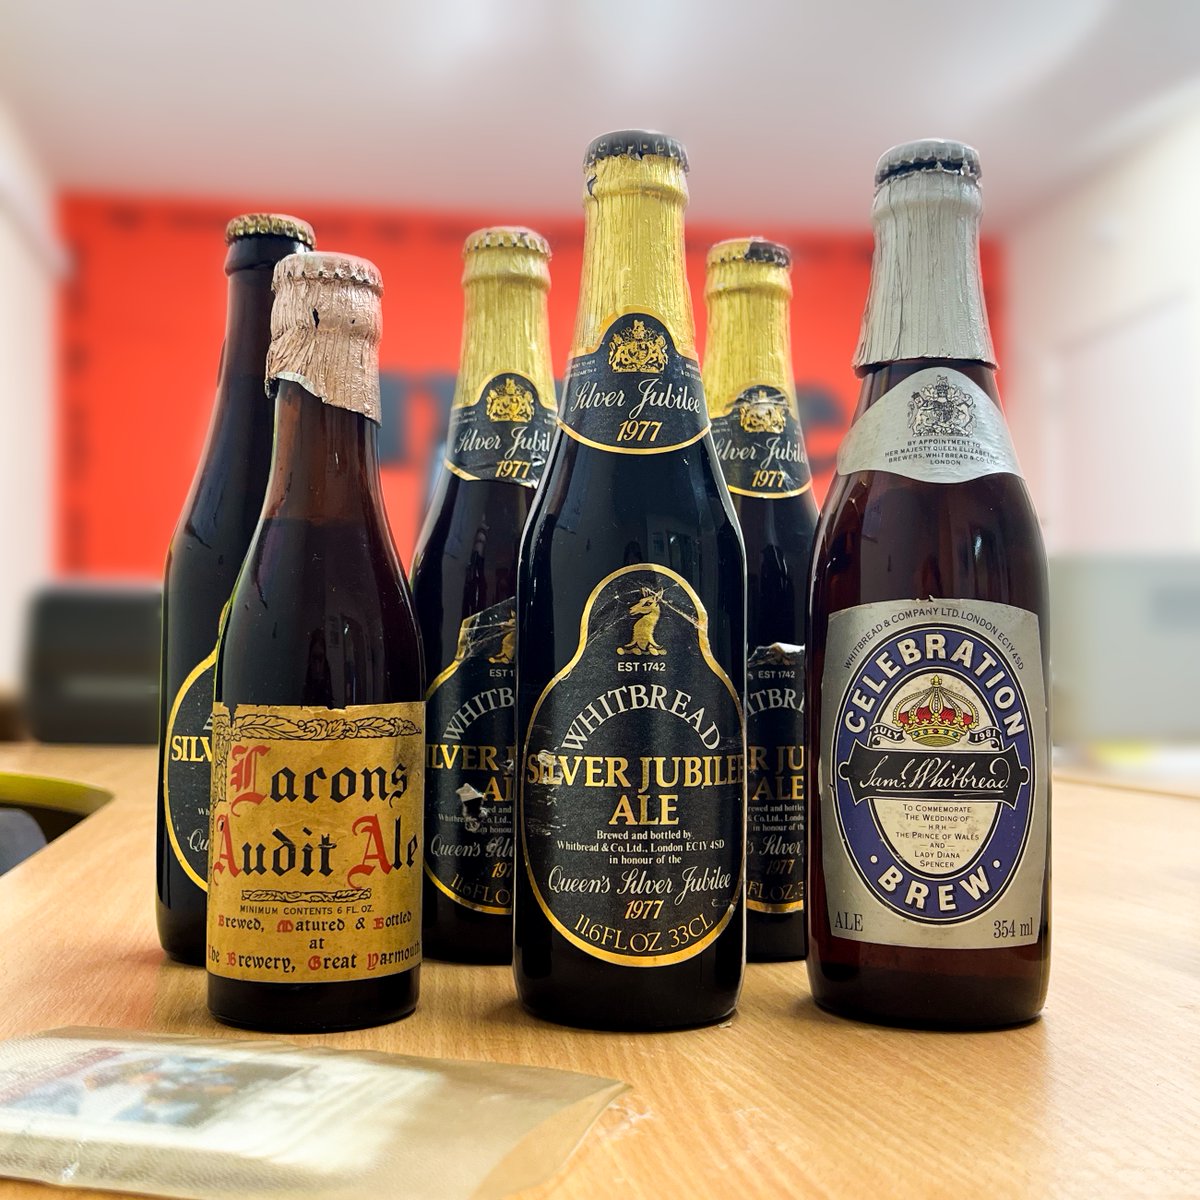 These vintage Lacons & Whitbread bottles have been generously donated by Mrs Welsh. Her husband acquired these when working as bottling plant foreman, then part of the dray team, in the 60s & 70s. Did anyone you know work for Lacons during that time? They may have crossed paths!